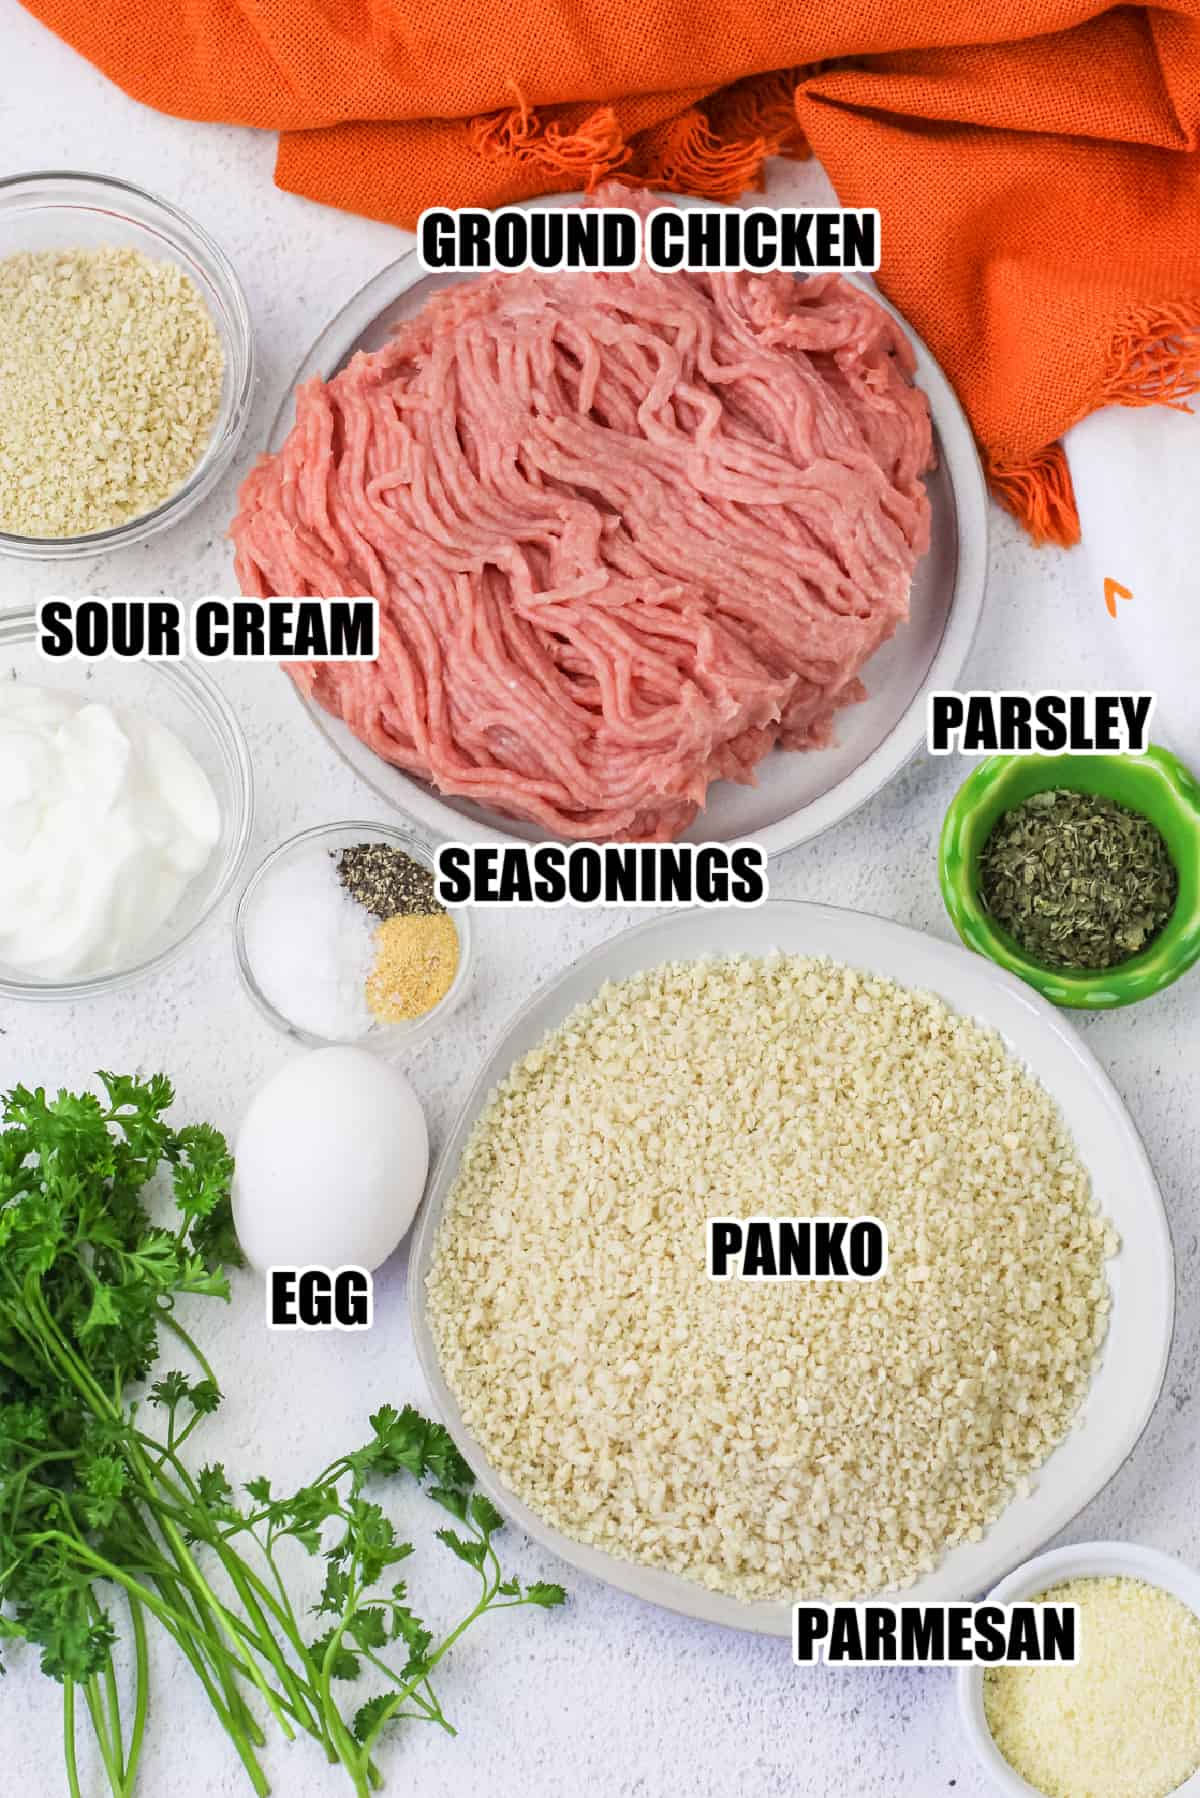 ingredients to make Chicken Nuggets including ground chicken, sour cream, seasonings, parsley, egg, panko, and parmesan